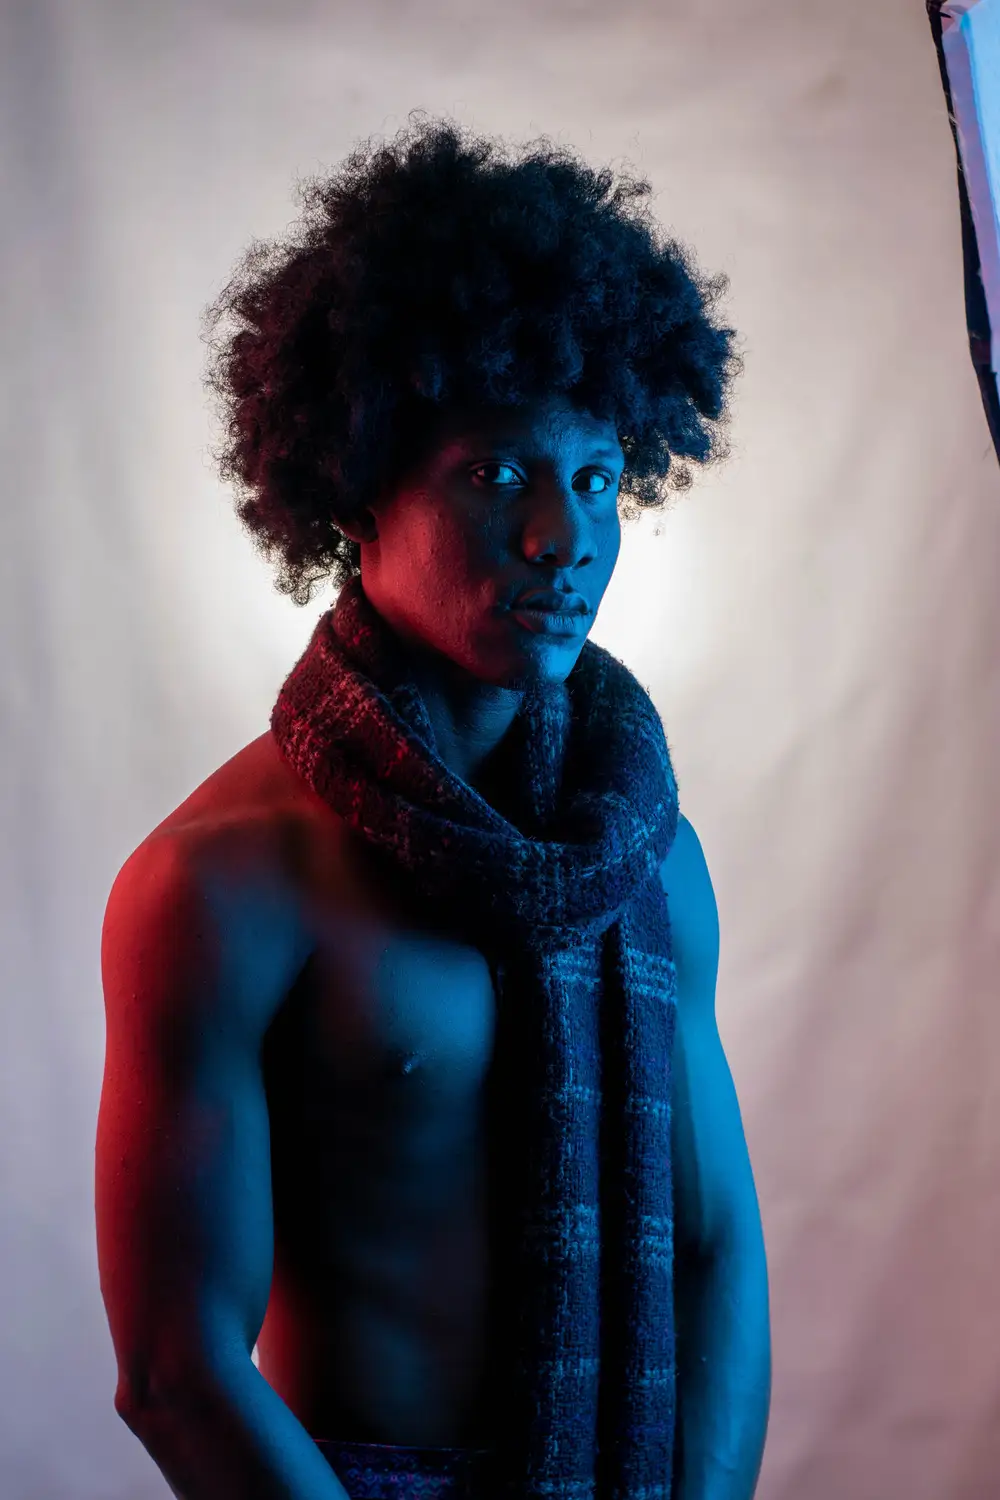 model on afro hair style puts a scarf around his neck